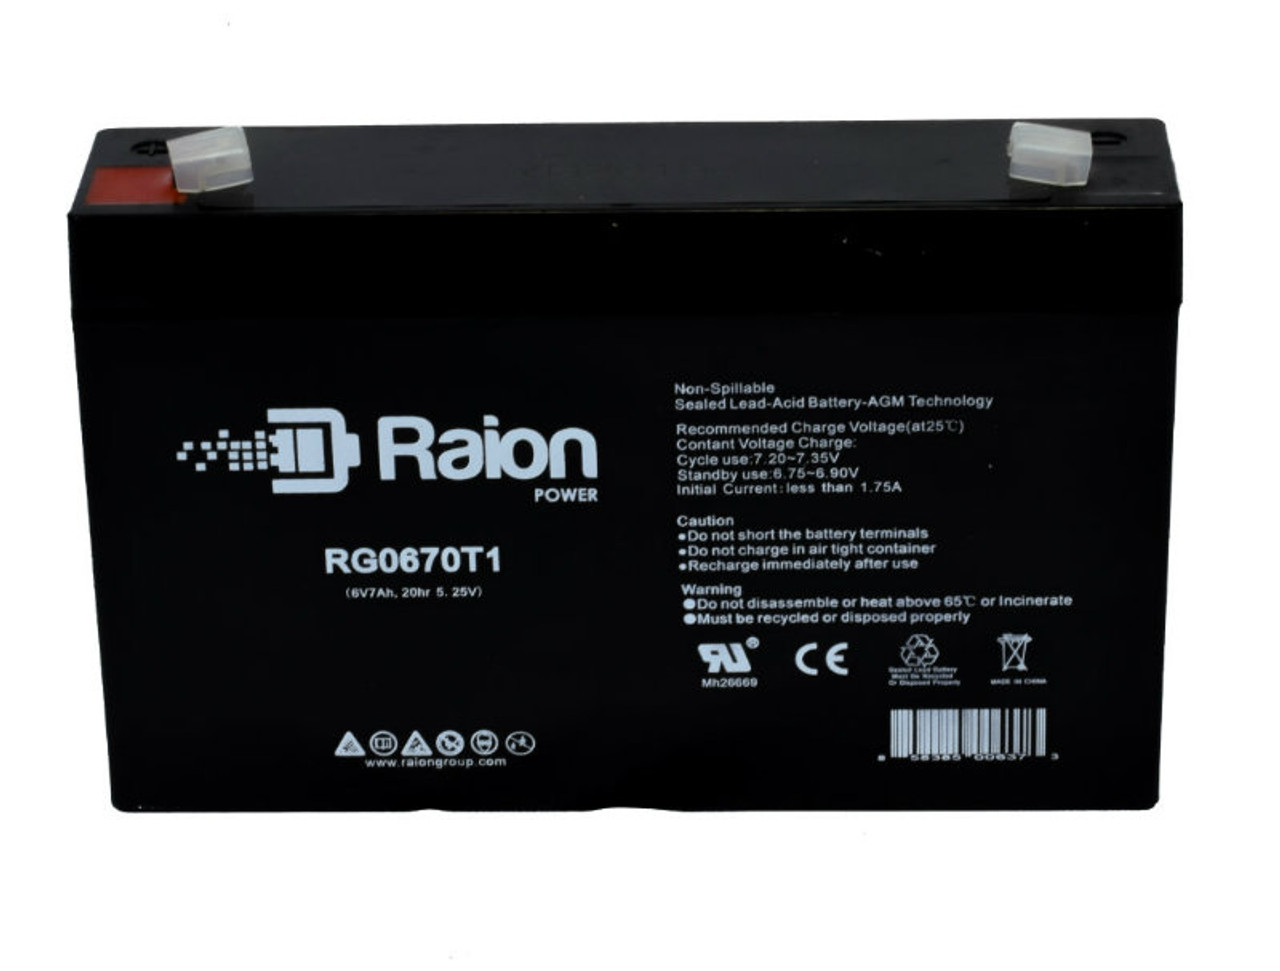 Raion Power RG0670T1 Replacement Battery Cartridge for Pace Tech Vitalsign 600